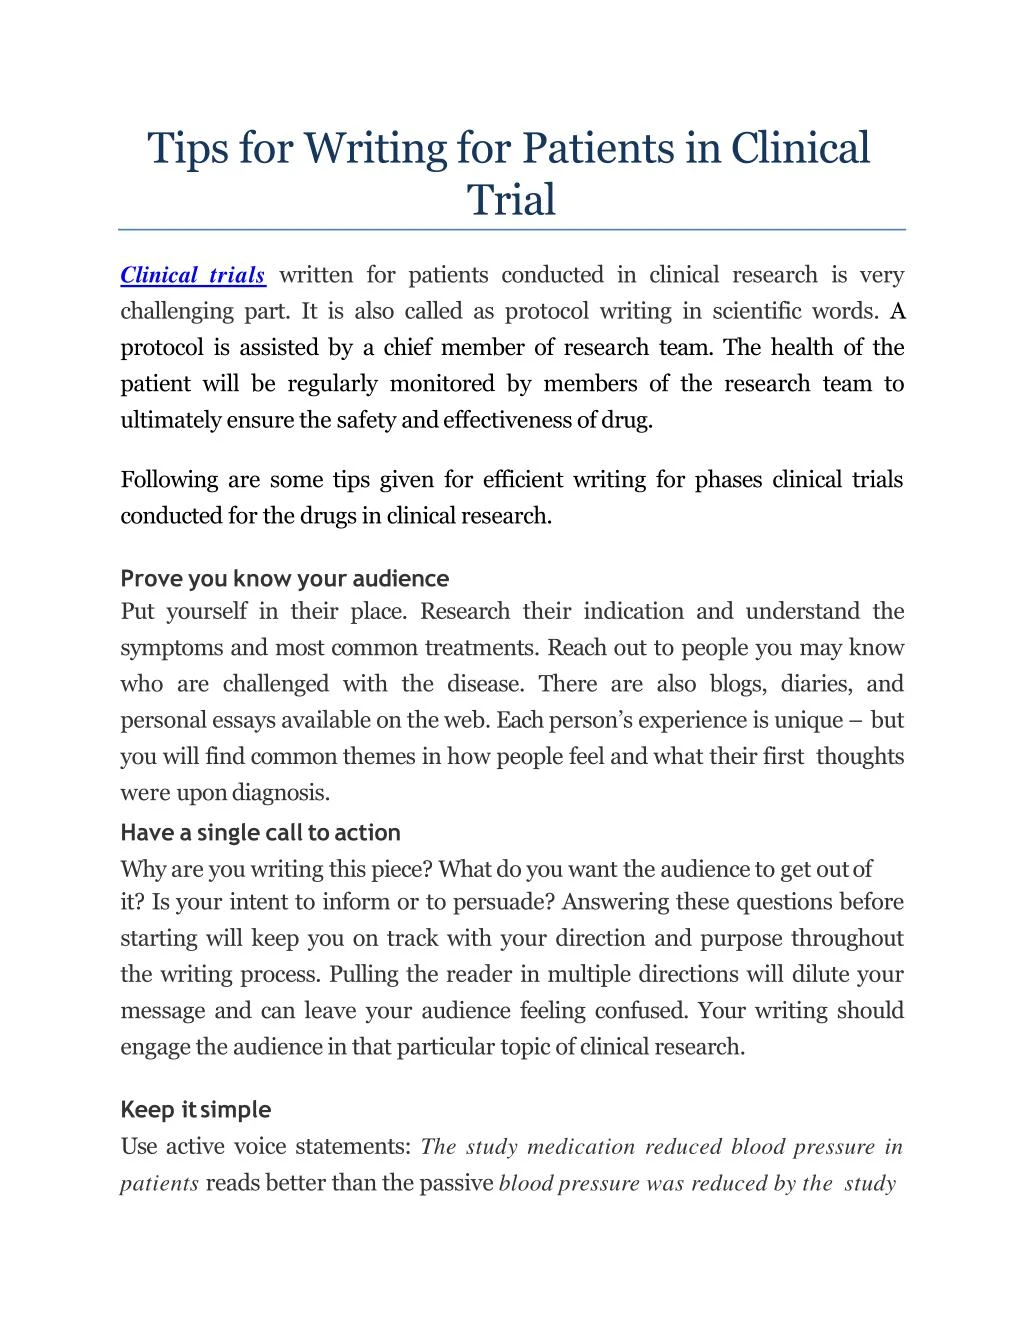 tips for writing for patients in clinical trial